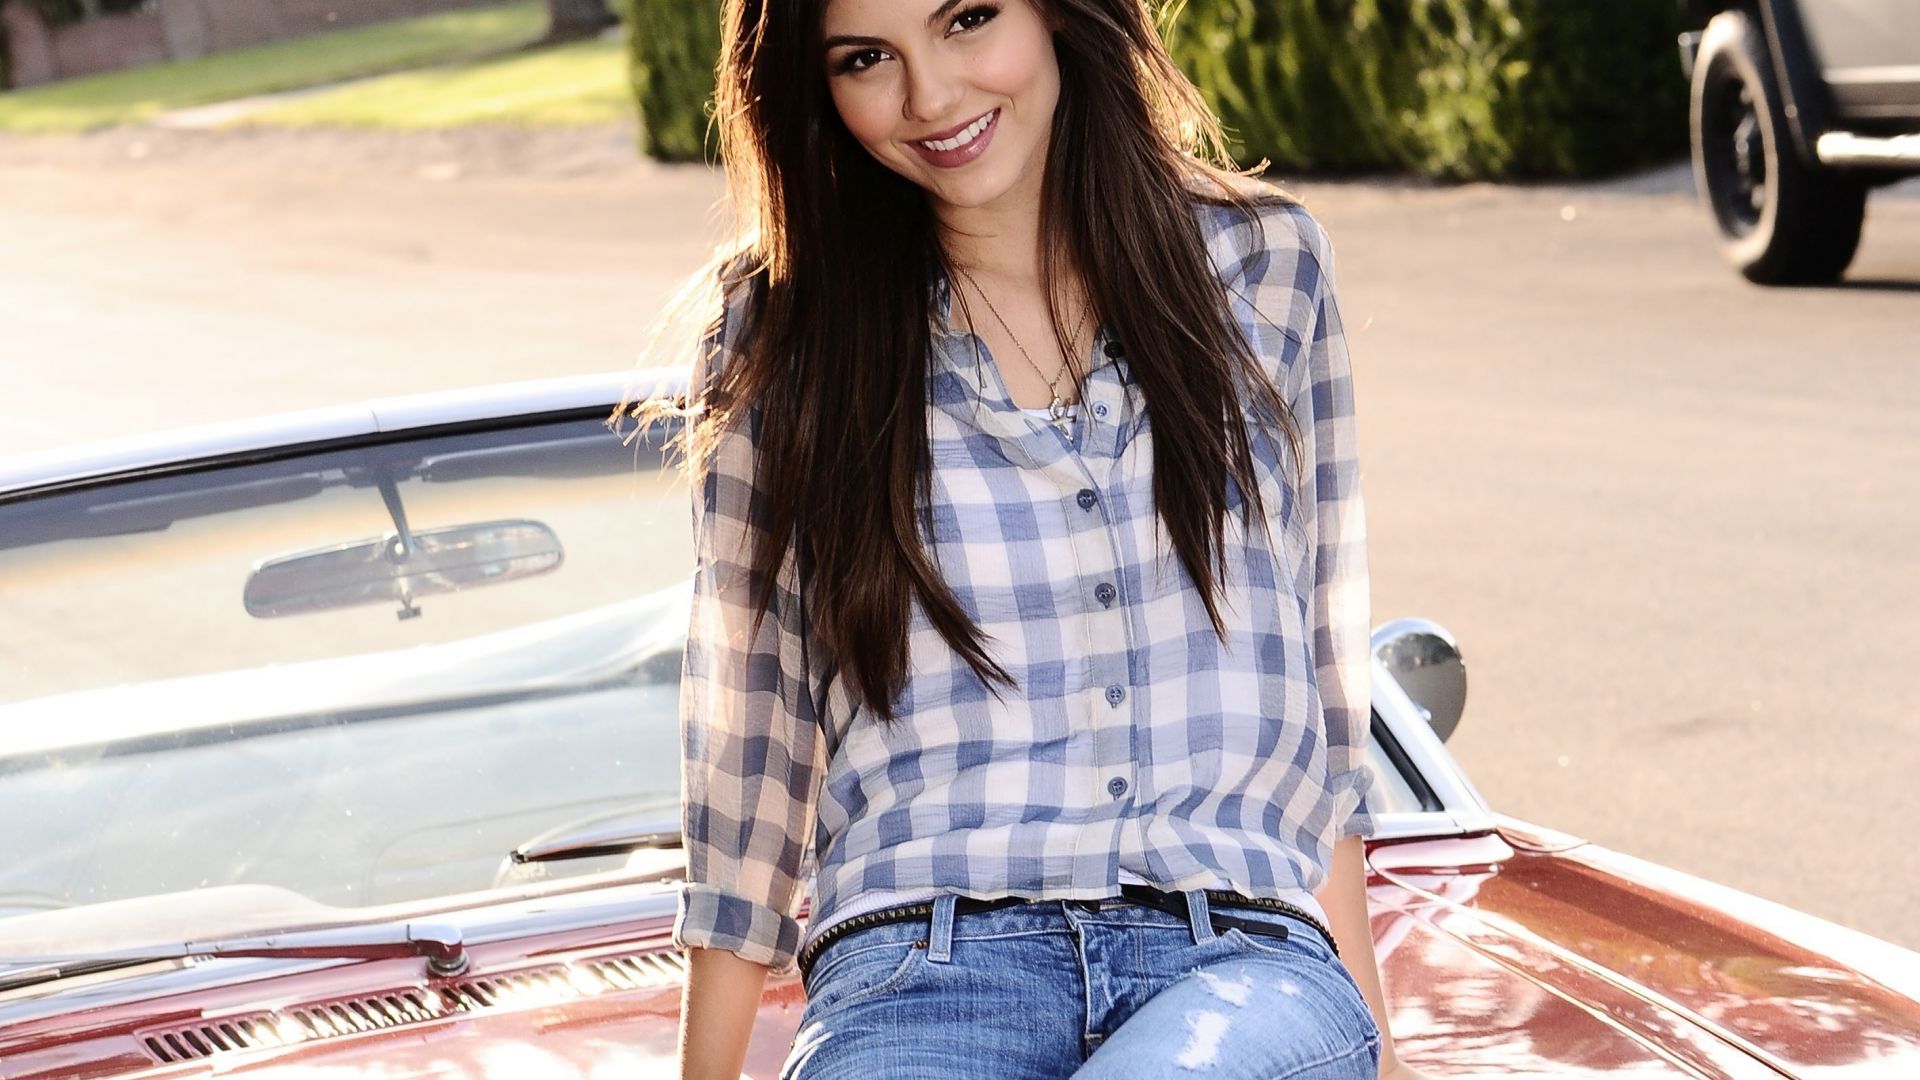 Wallpaper Victoria justice, sitting on car, jeans